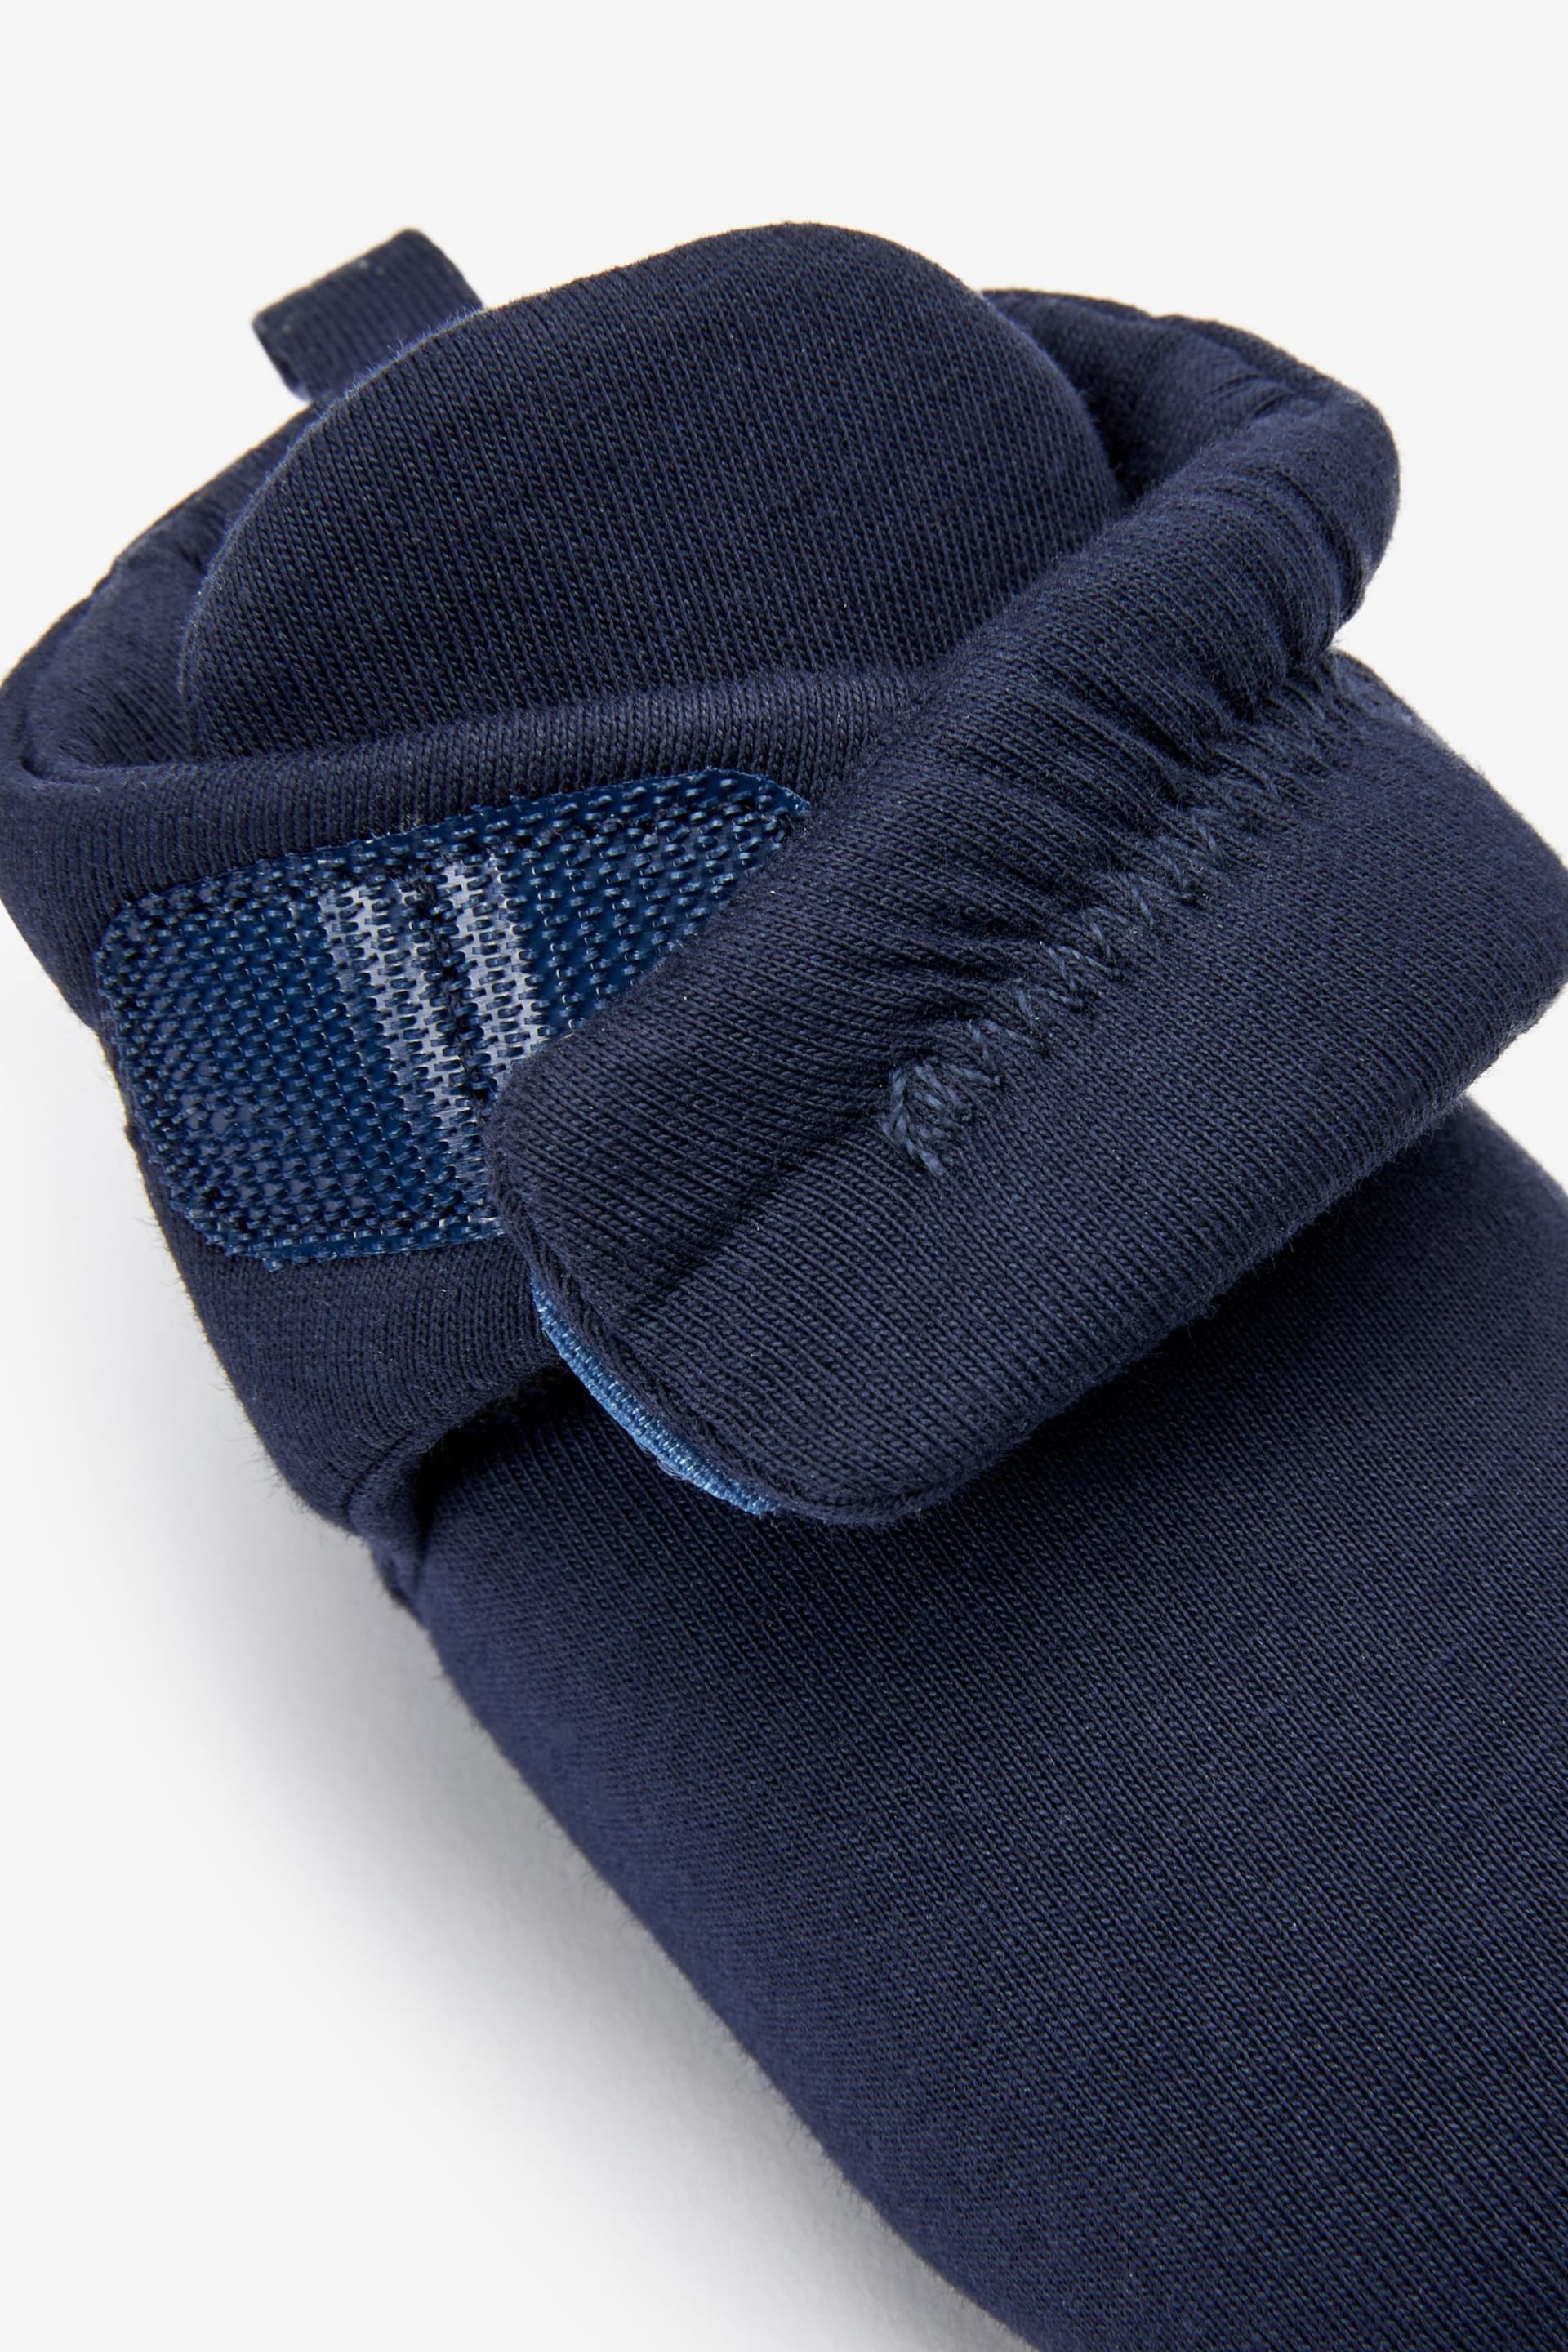 Navy Blue Cosy Baby Boots (0-24mths) - Image 4 of 5